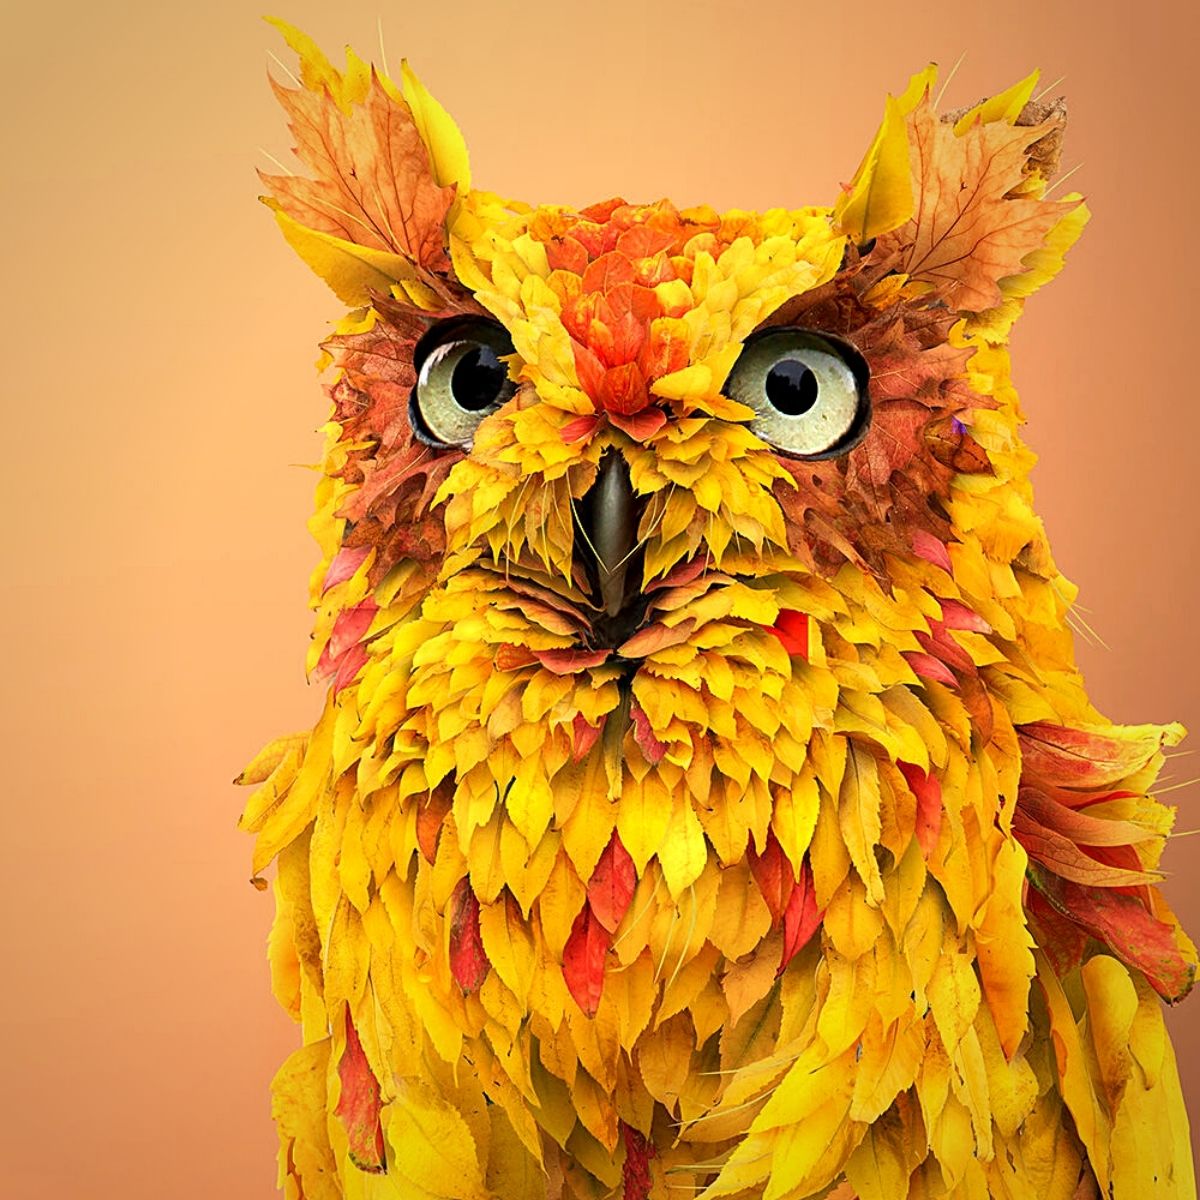 Josh Dykgraaf Reimagines Animals From Foliage and Flowers in His Photographic Art